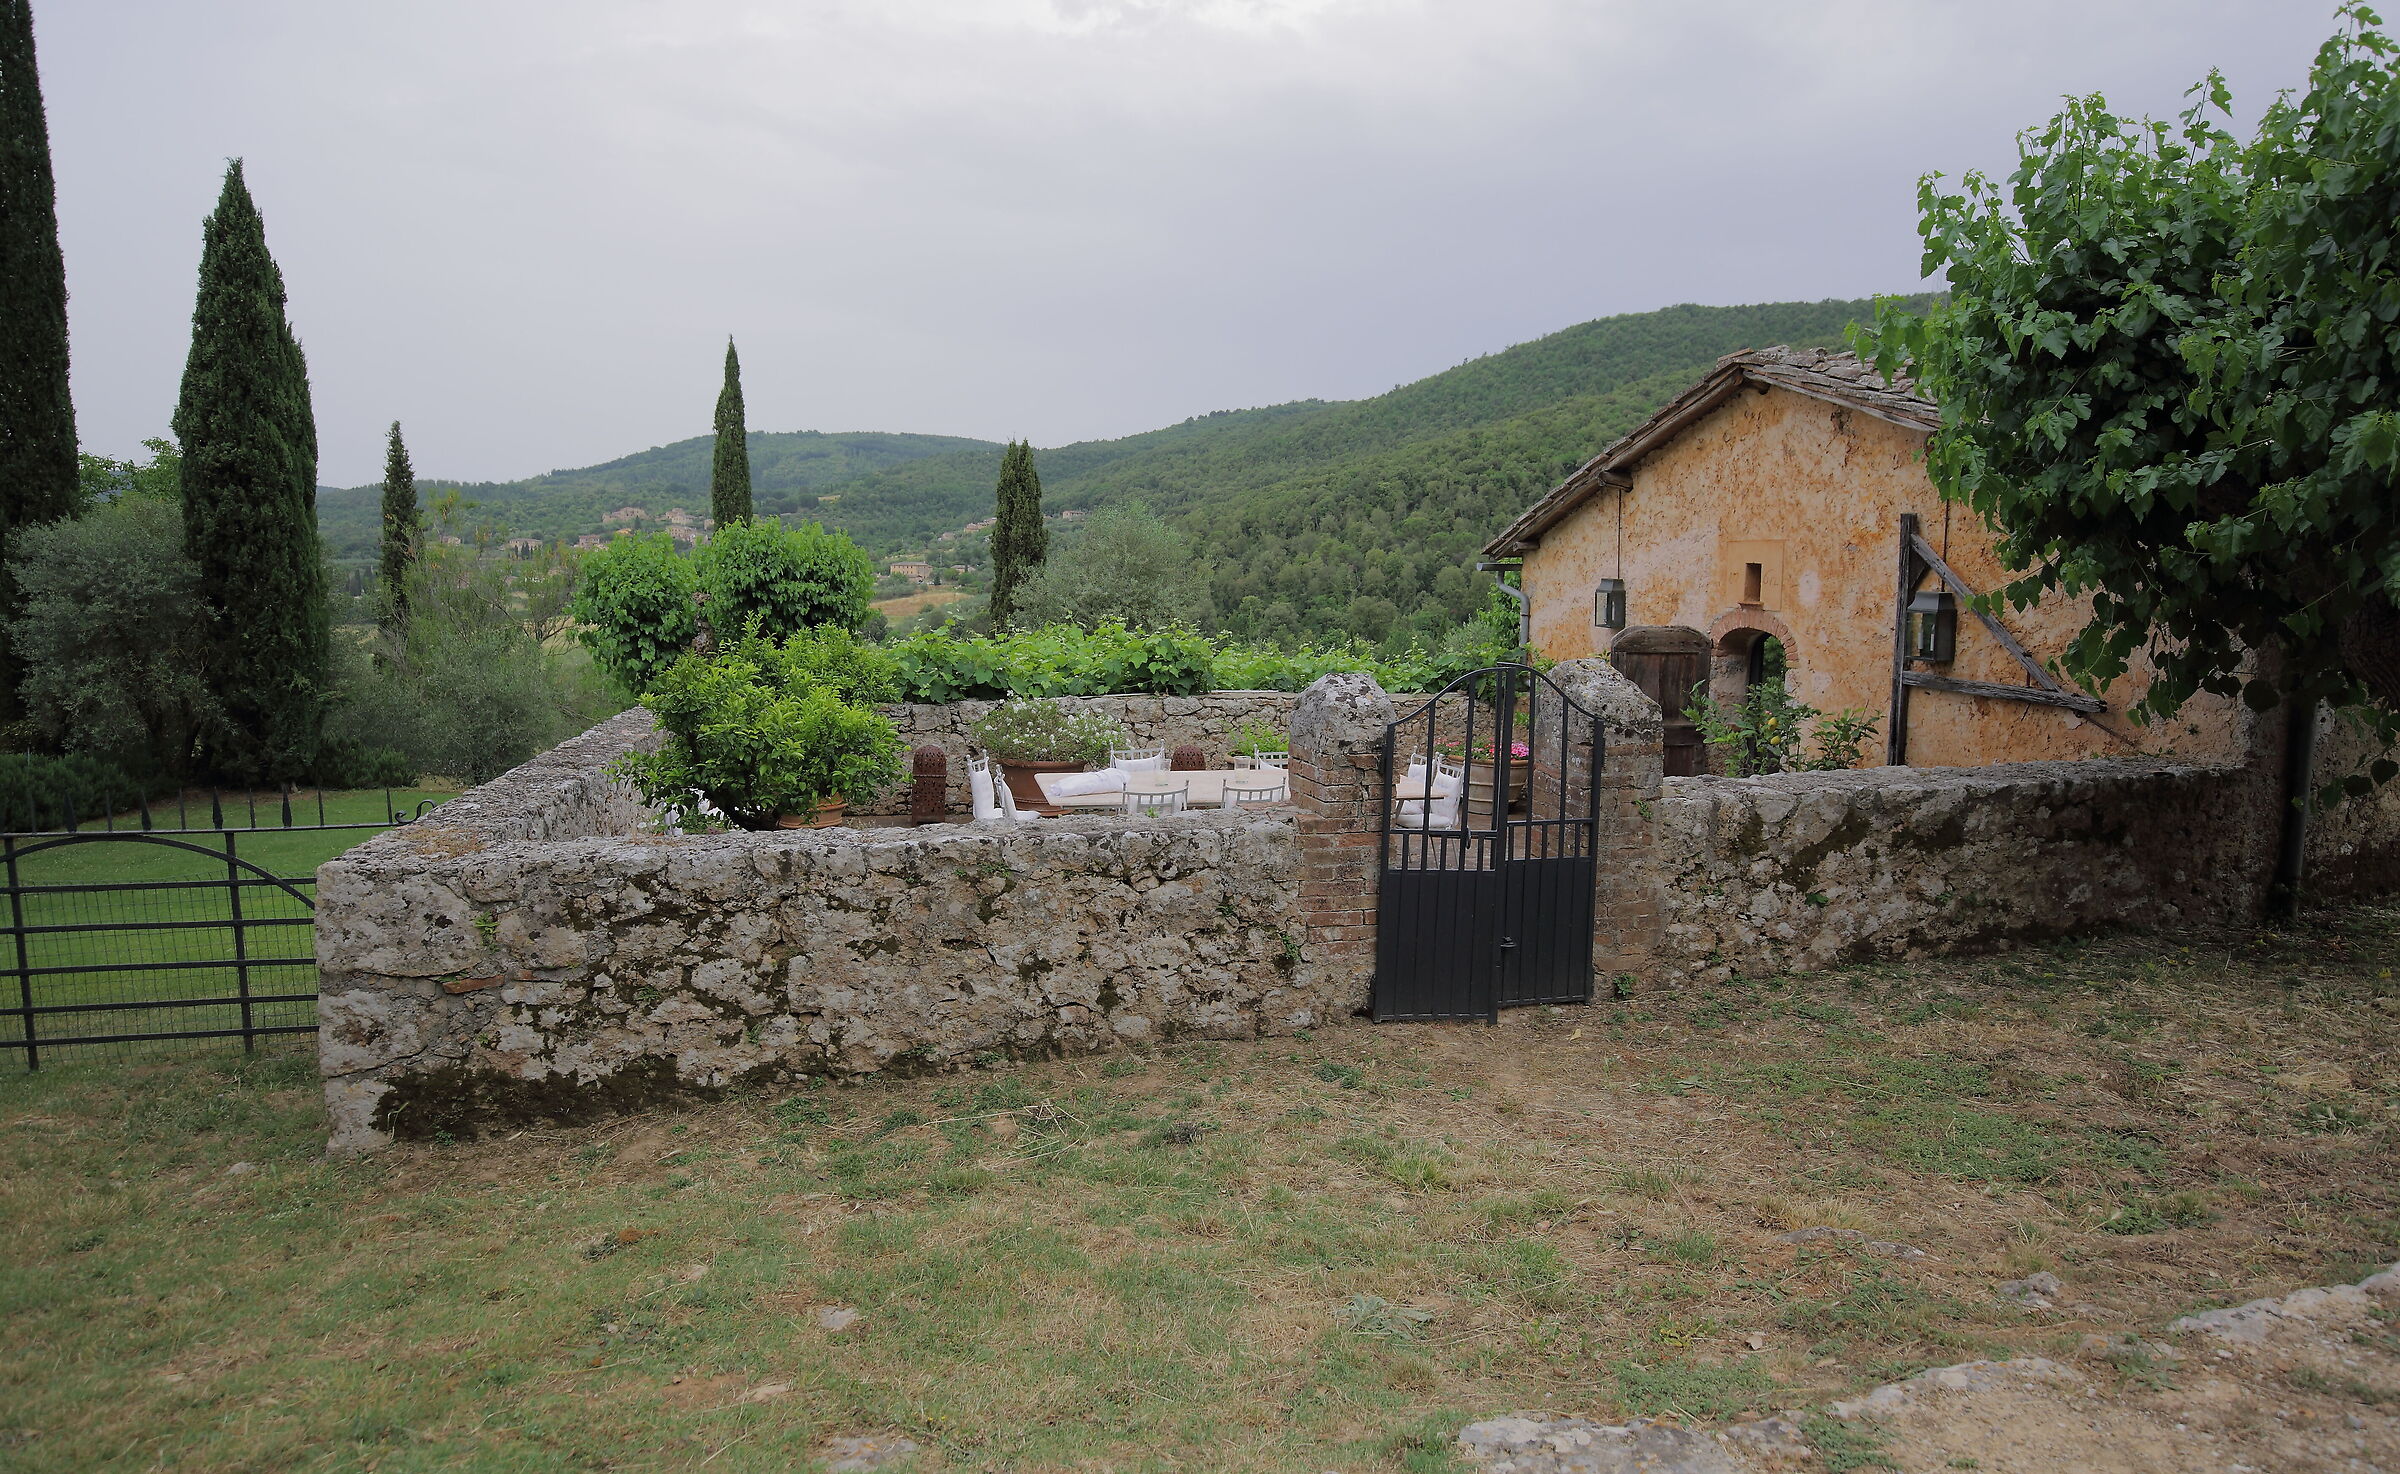 The outbuildings of Villa Cetinale, from the stable to the stars...